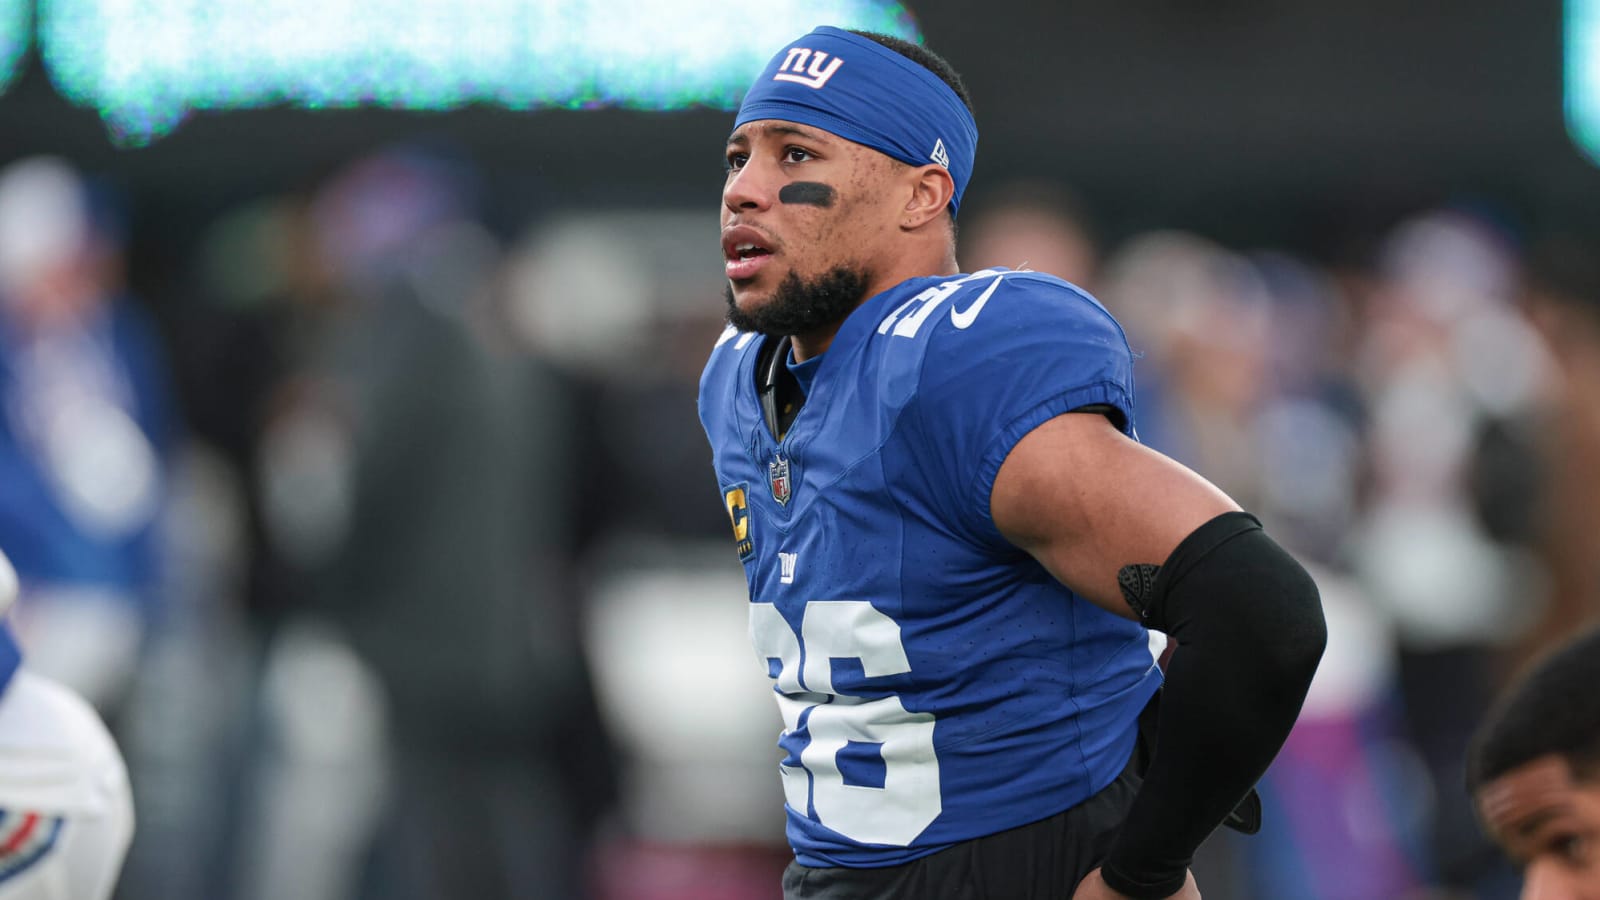 Giants RB Saquon Barkley says he can envision himself in a different uniform